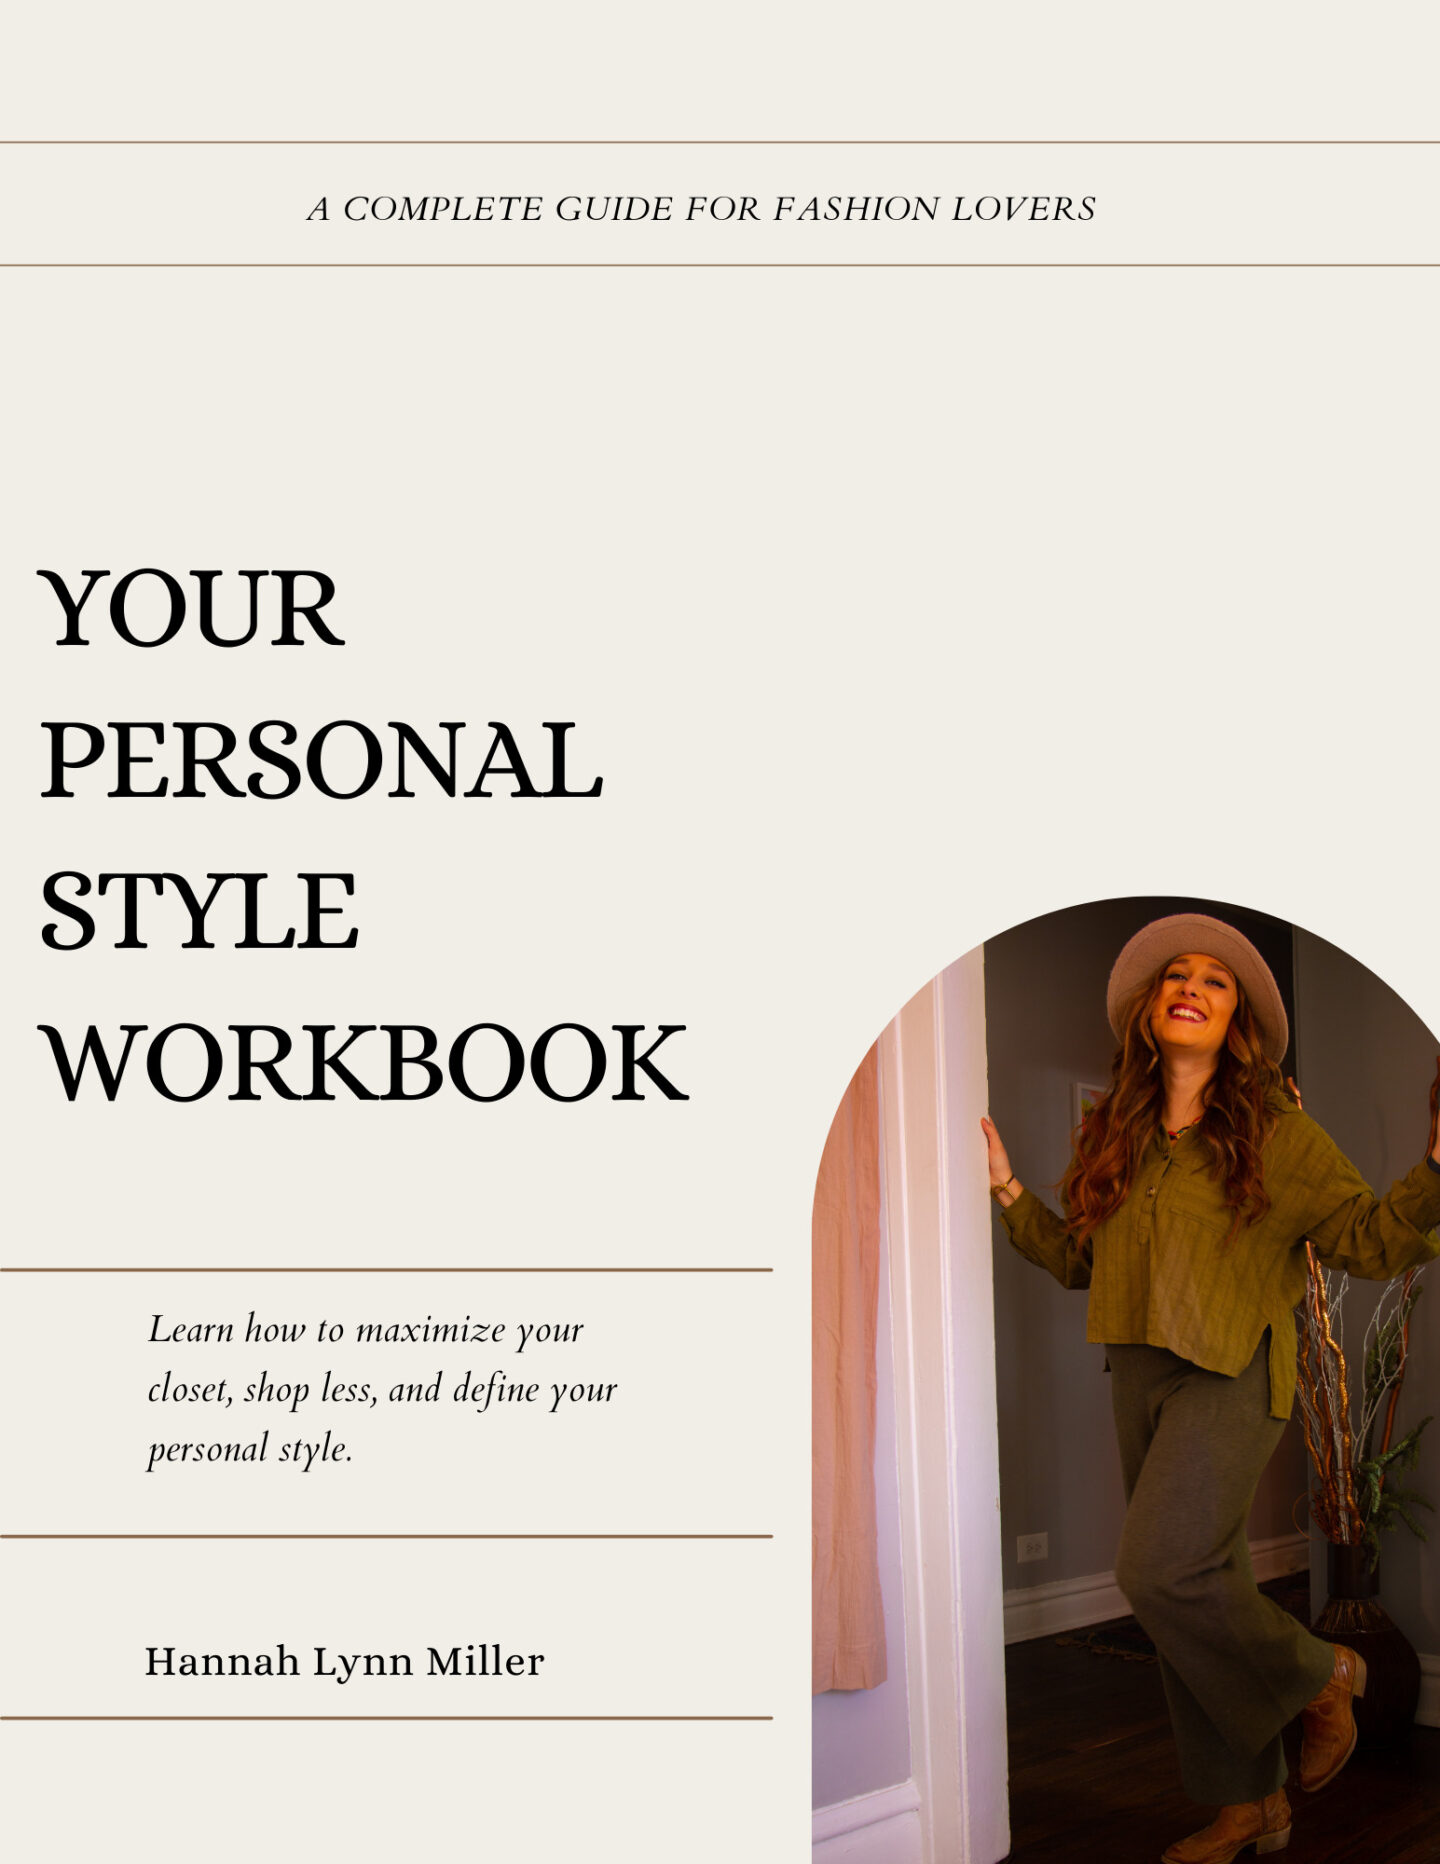 Your Personal Style Workbook